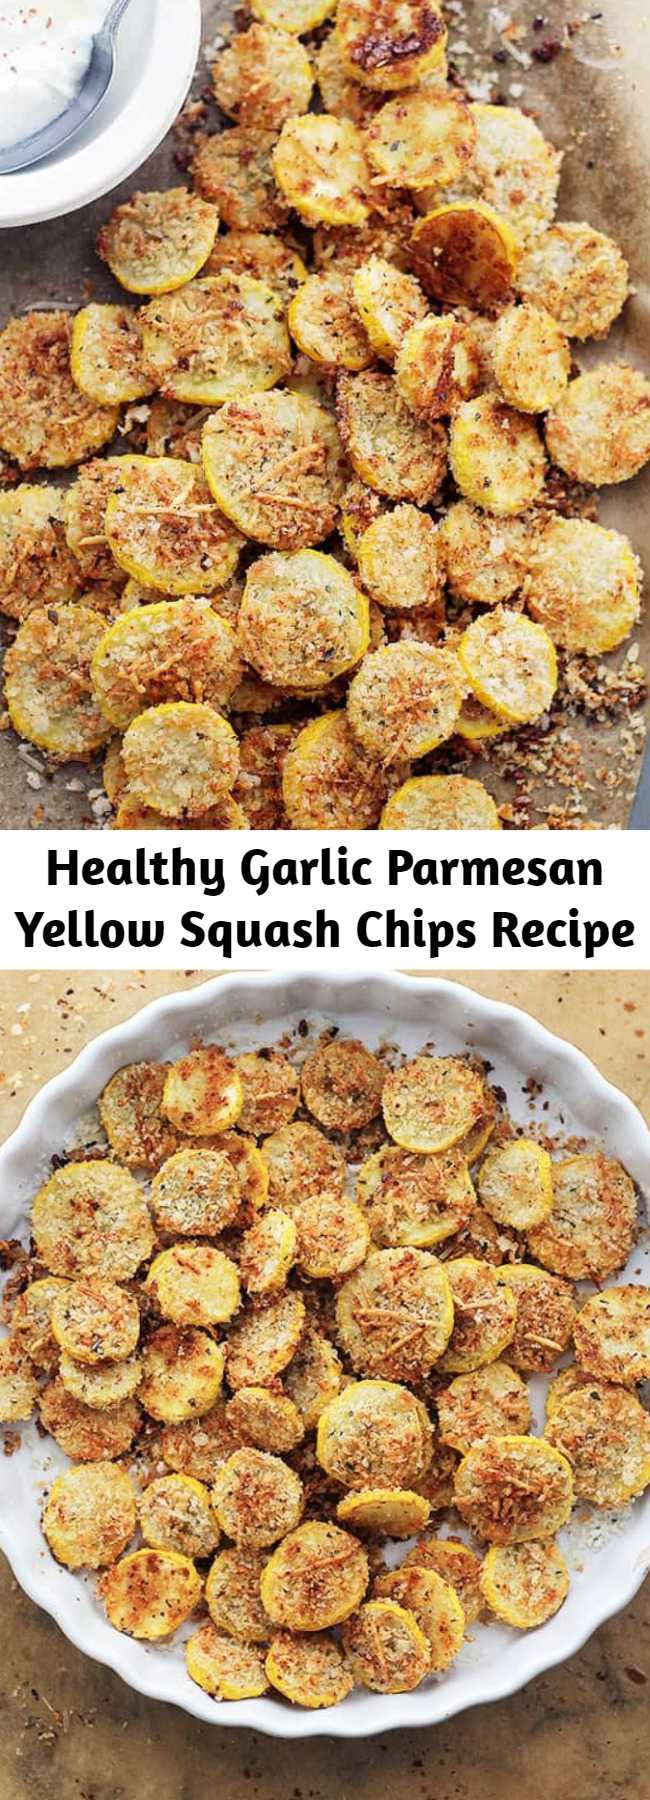 Healthy Garlic Parmesan Yellow Squash Chips Recipe - A healthy snack or appetizer that is incredibly flavorful, crispy, and absolutely delicious! These are BEYOND amazing!